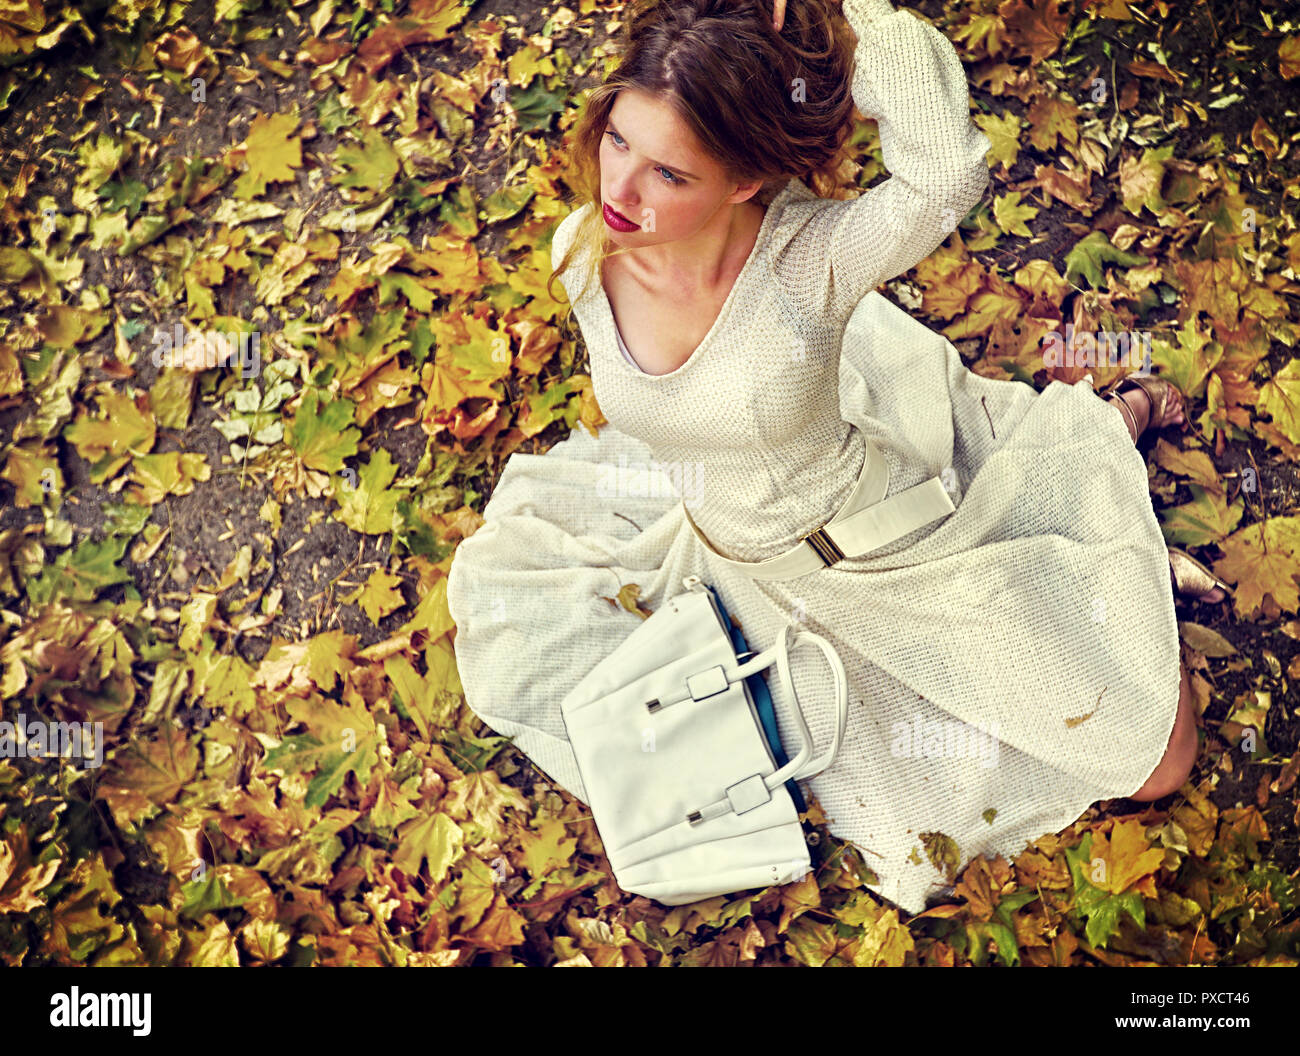 Autumn fashion dress woman sitting fall leaves city park outdoor. Stock Photo